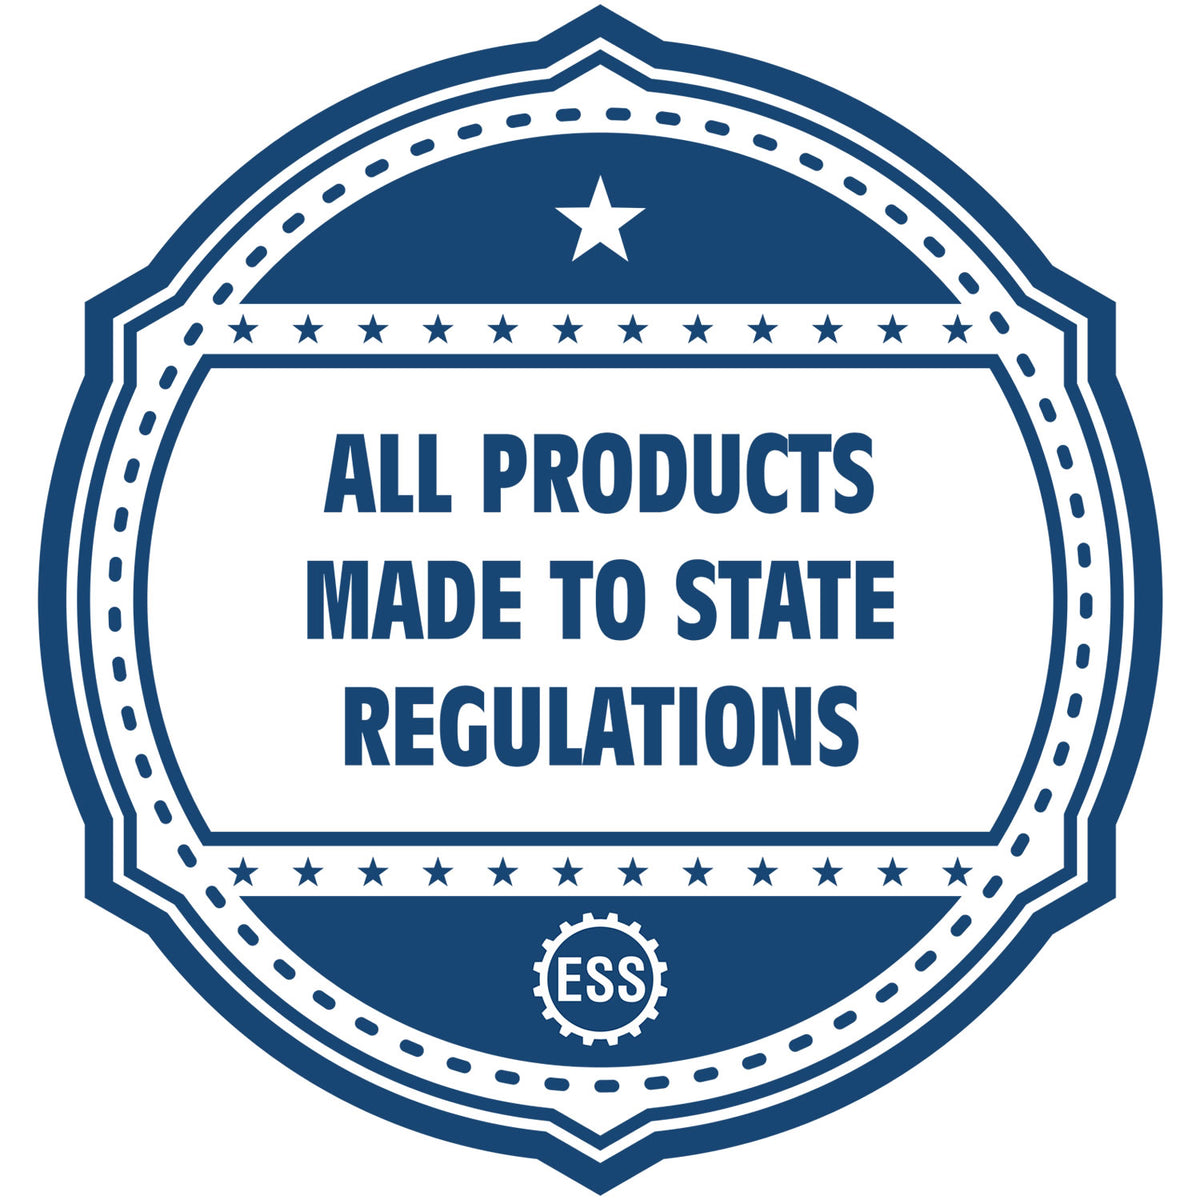 An icon or badge element for the Super Slim Nevada Notary Public Stamp showing that this product is made in compliance with state regulations.